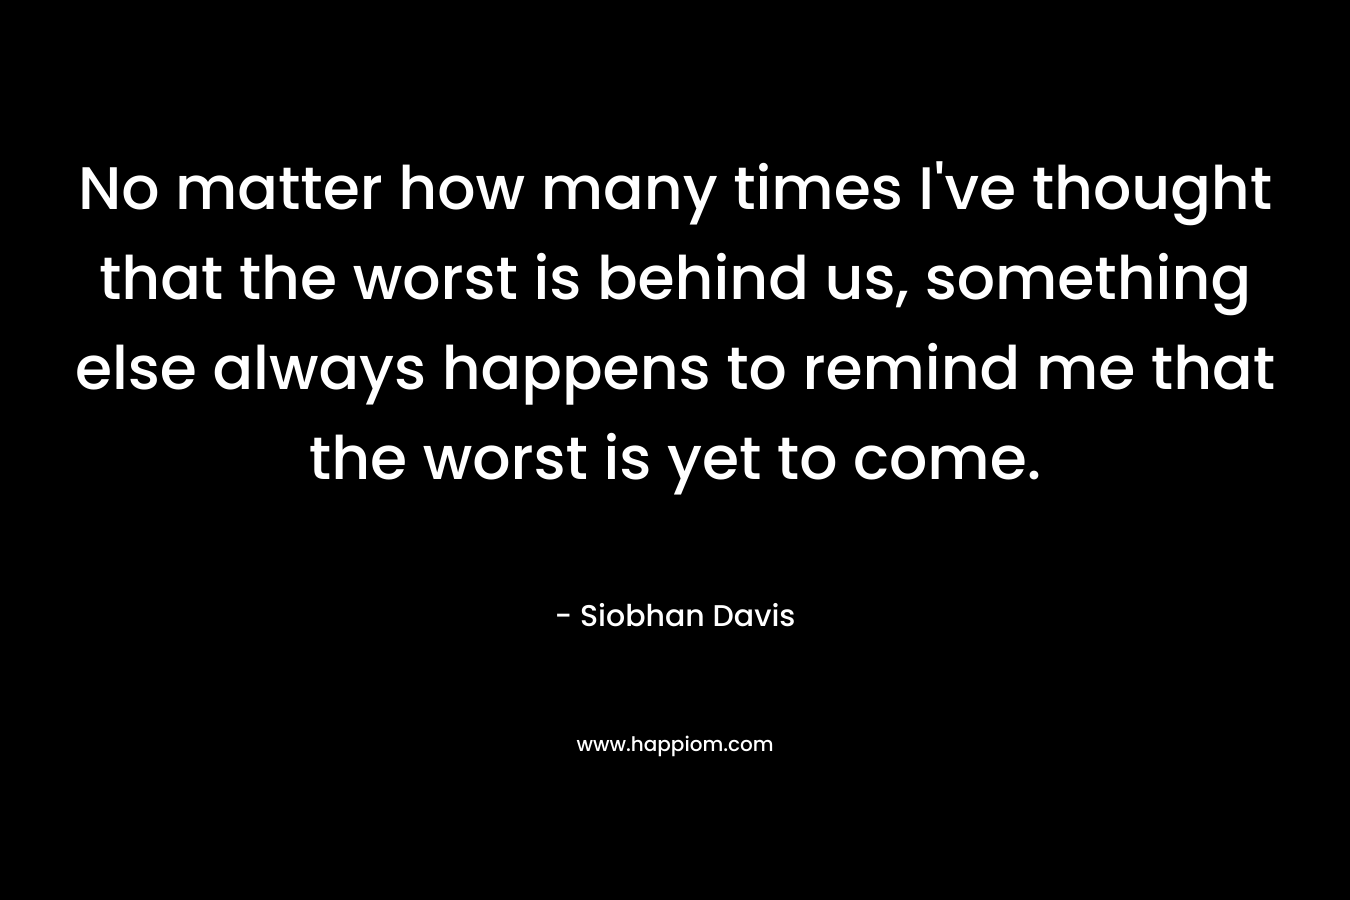 No matter how many times I've thought that the worst is behind us, something else always happens to remind me that the worst is yet to come.